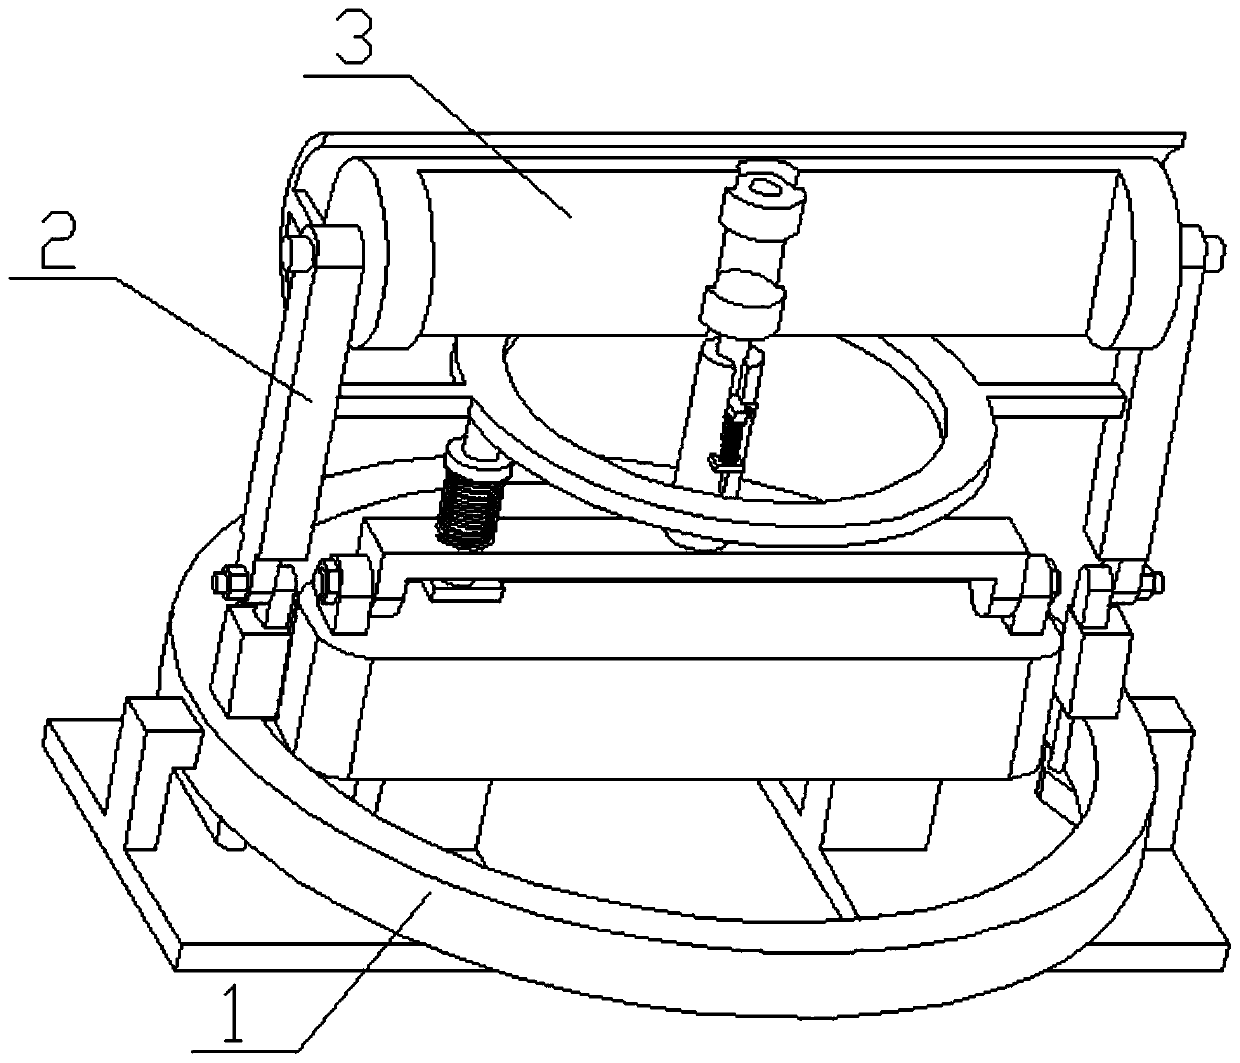 An adjustable English recitation auxiliary device